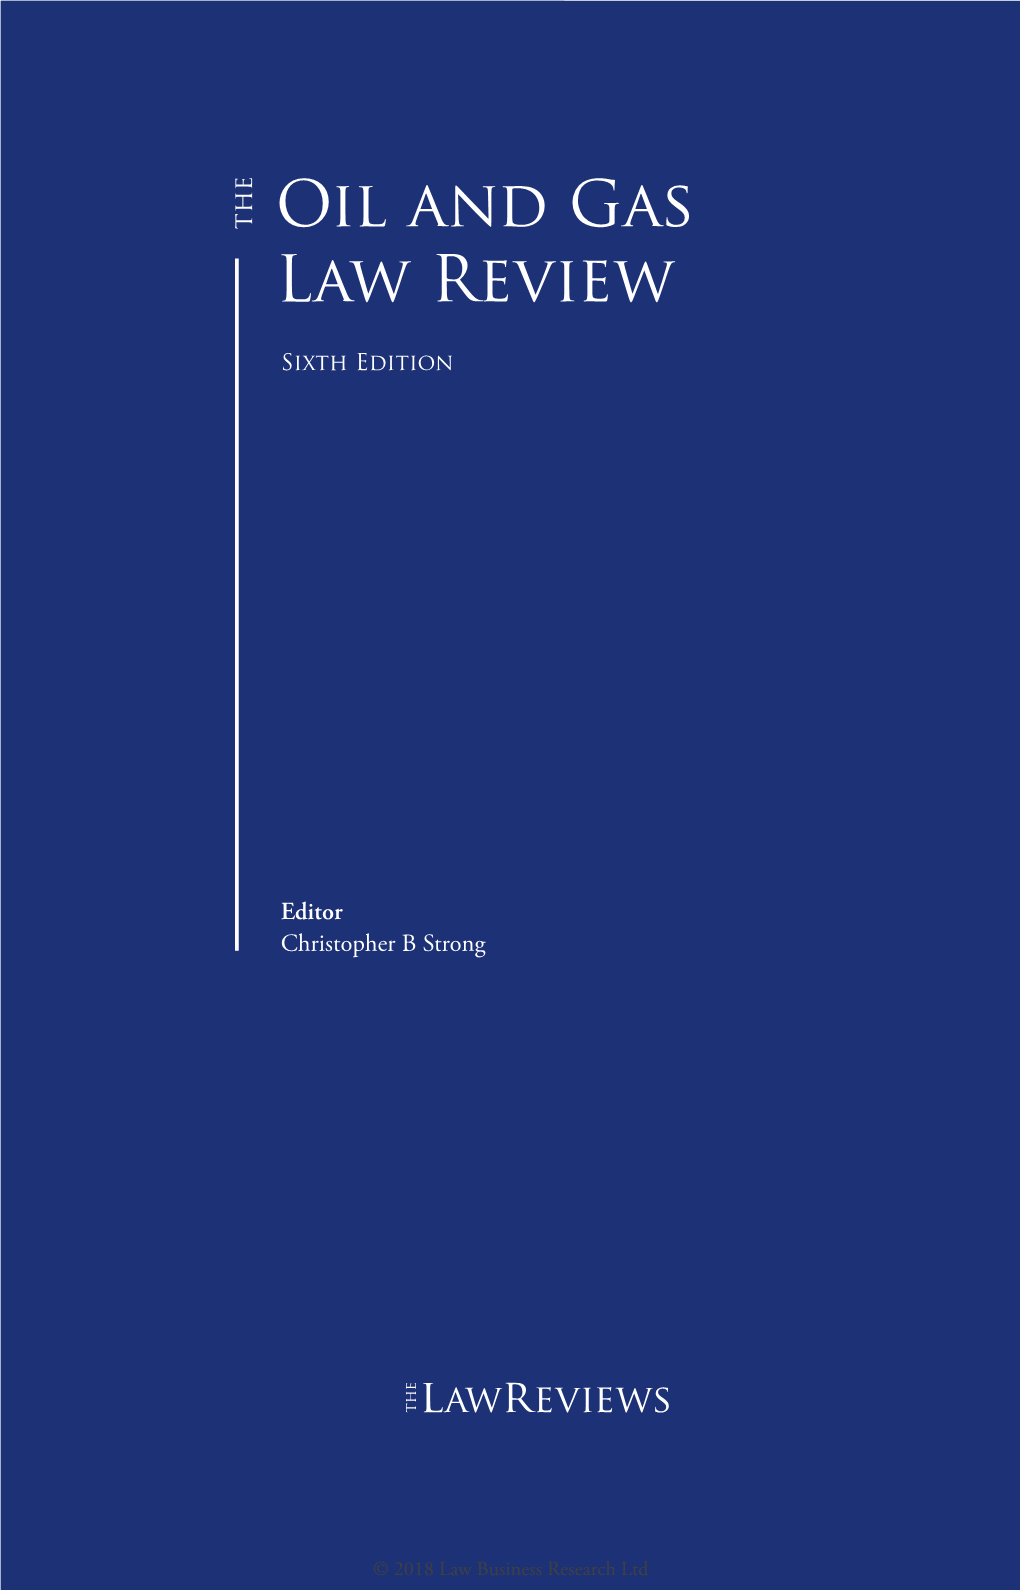 Oil and Gas Law Review